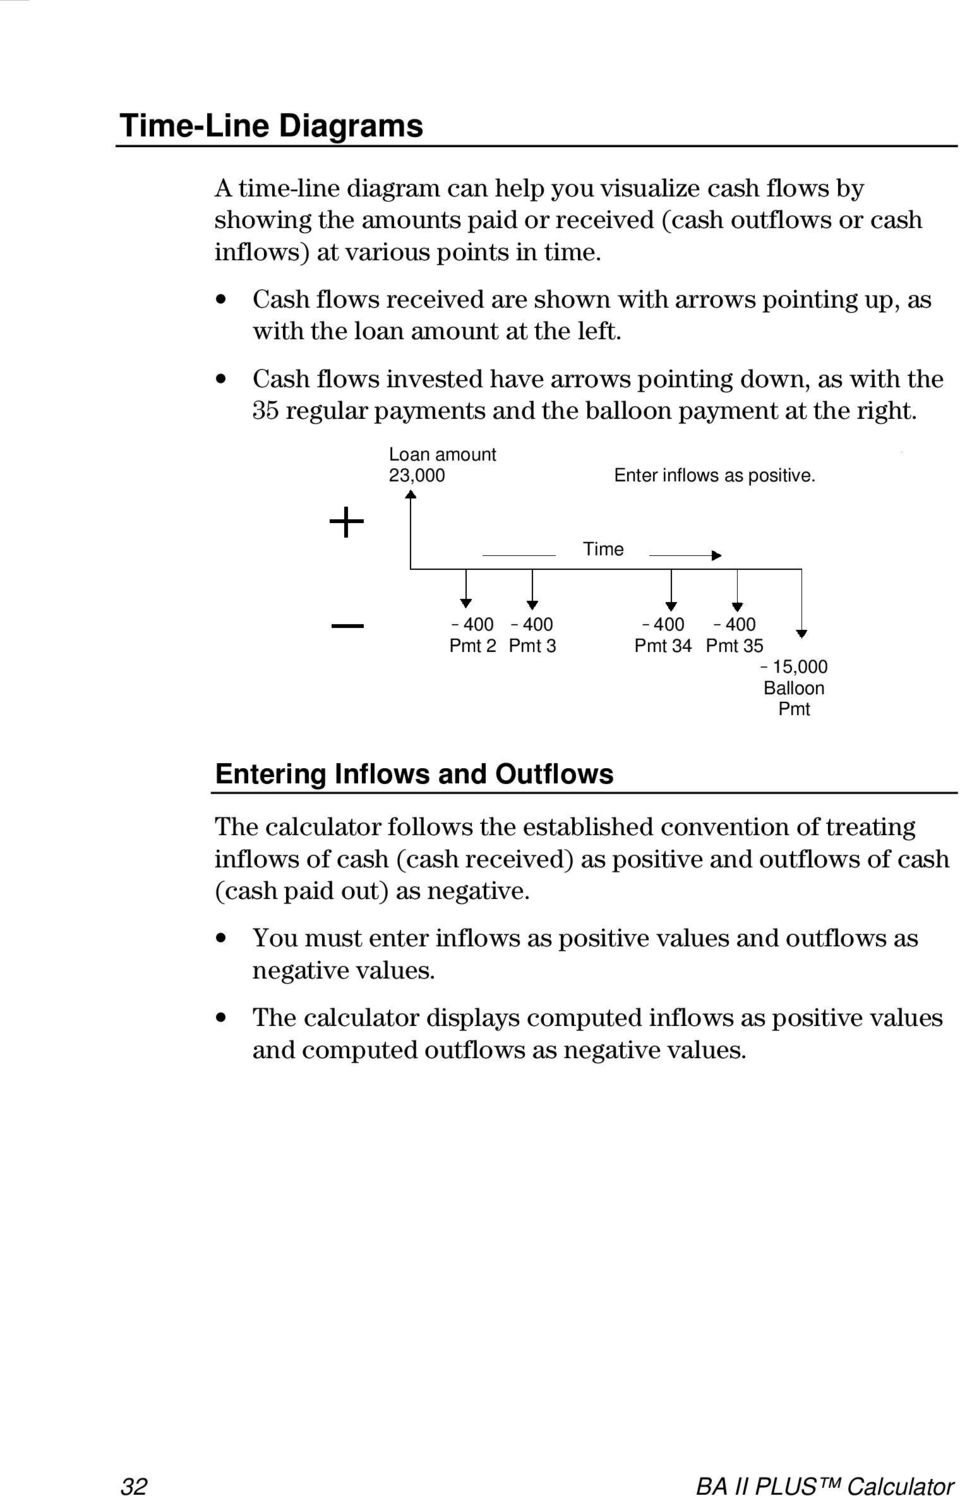 Cash flows invested have arrows pointing down, as with the 35 regular payments and the balloon payment at the right. Loan amount 23,000 Enter inflows as positive.